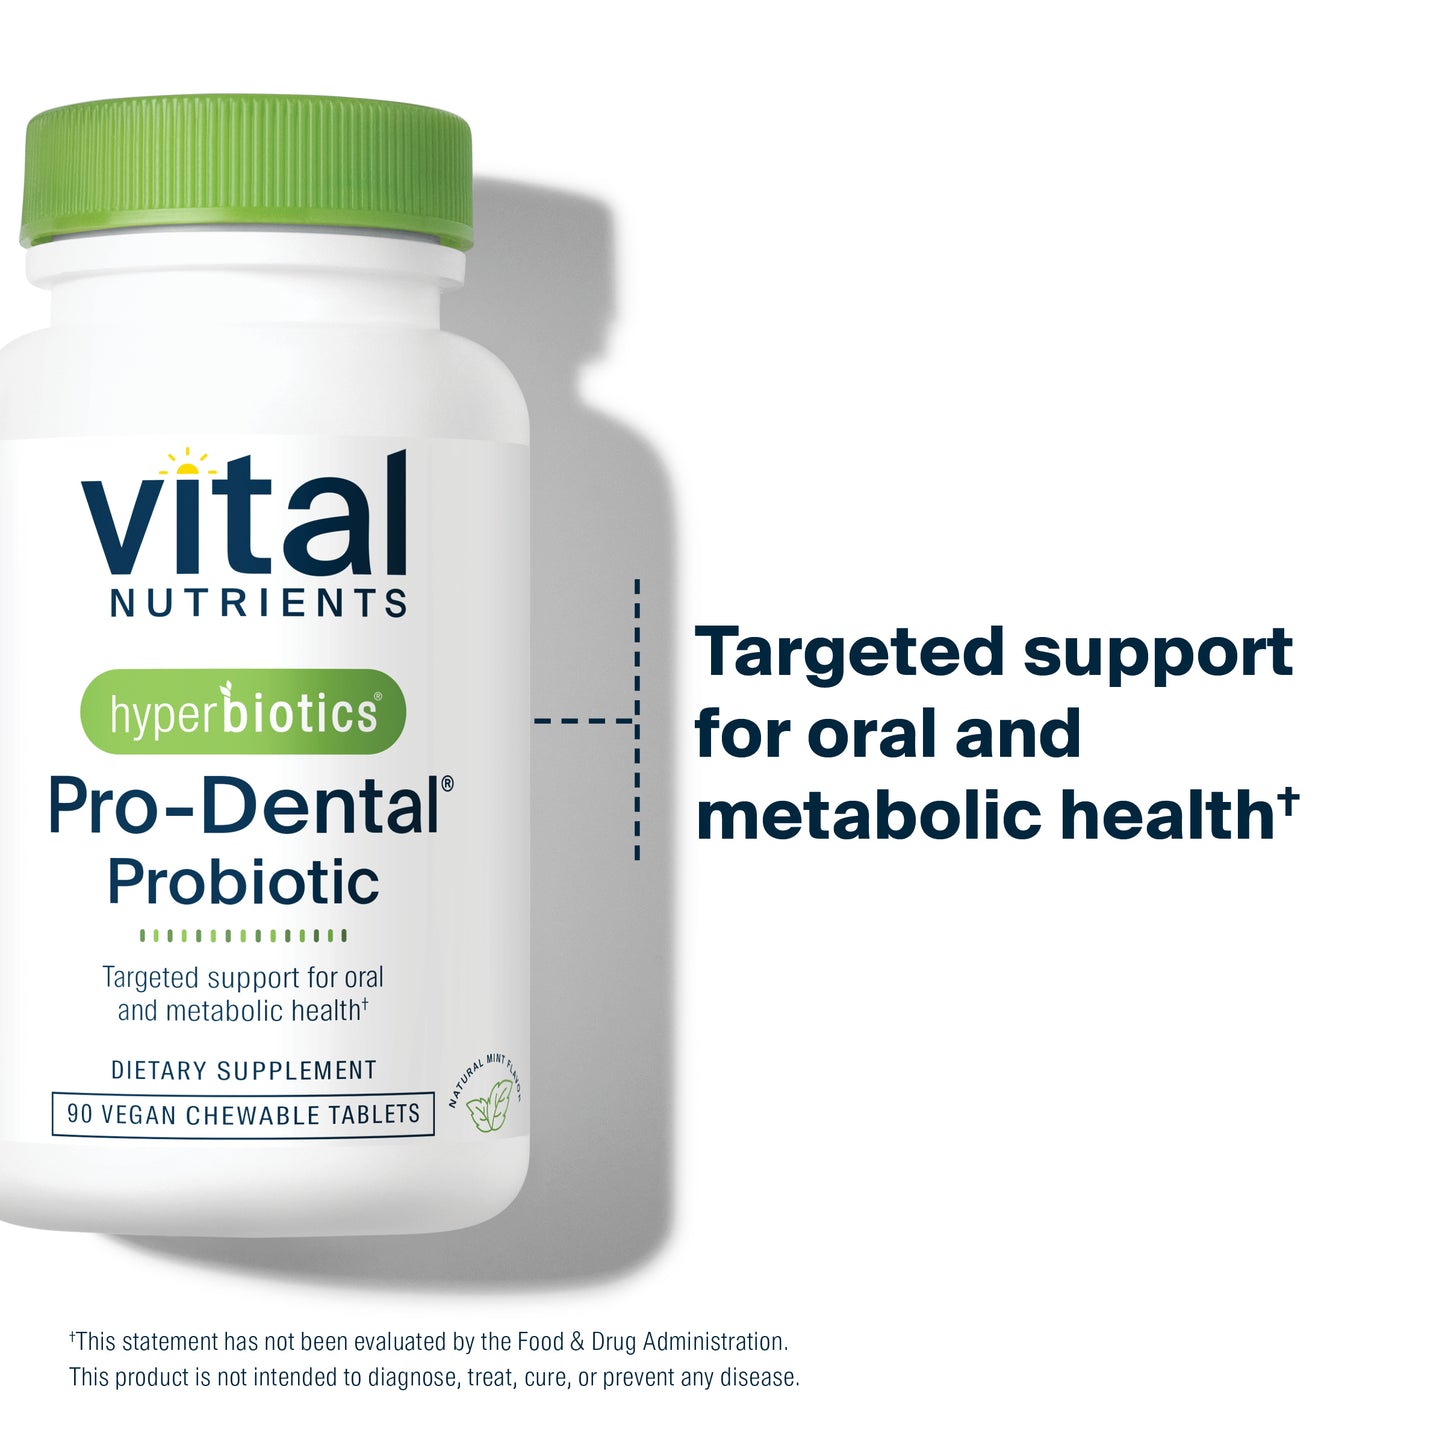 Hyperbiotics Pro-Dental Probiotic 90 chewable tablets targeted support for oral and metabolic health.*